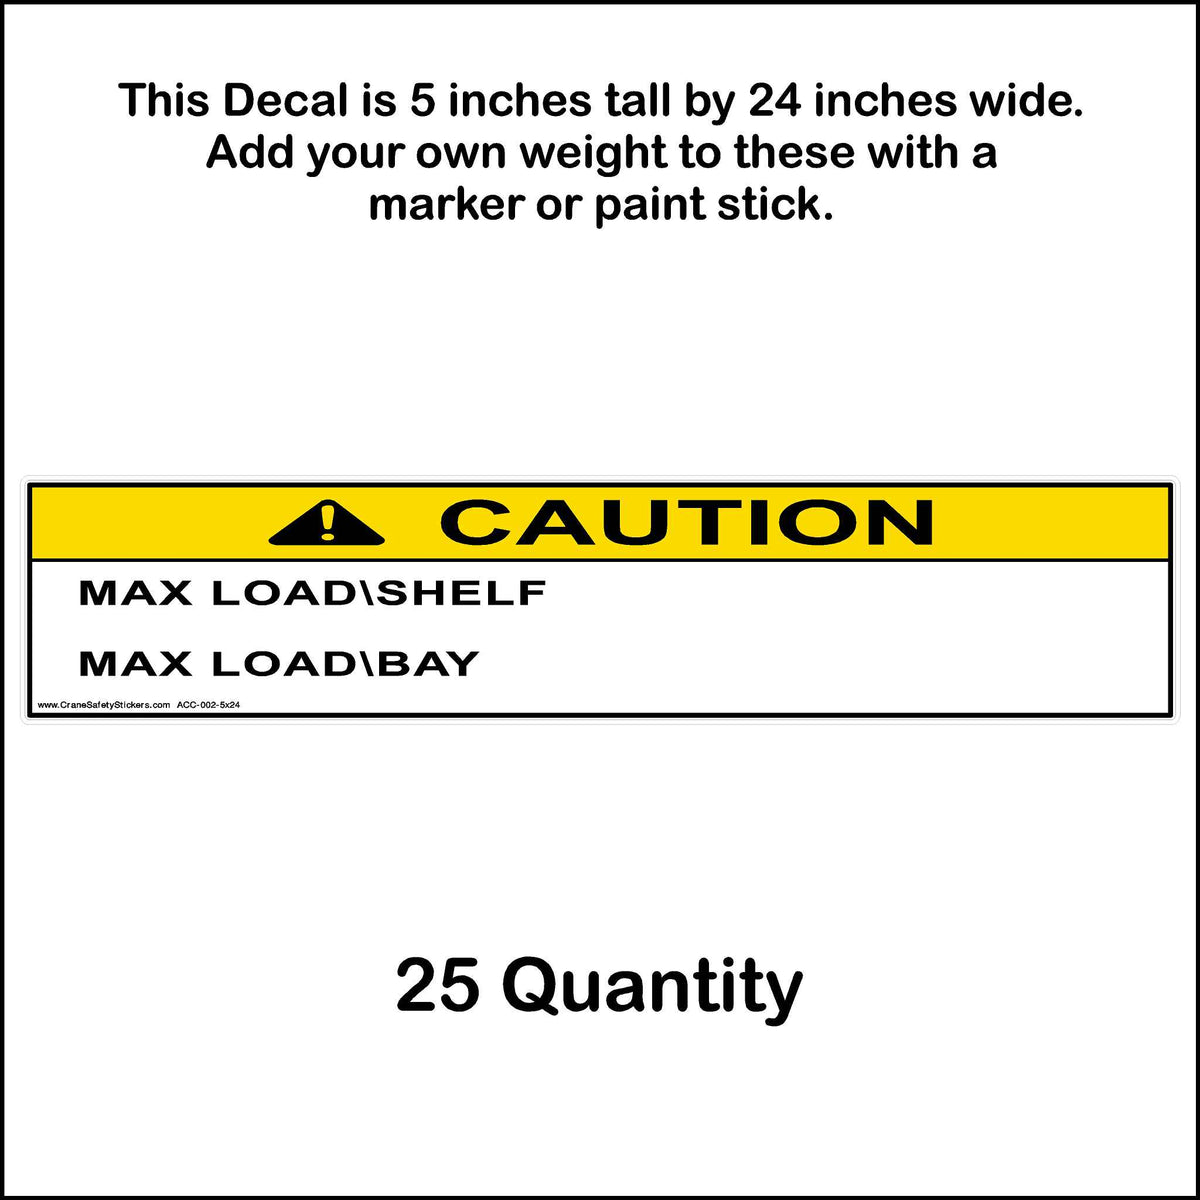 5 inches by 24 inches maximum load shelf and maximum load bay sticker 25 quantity.